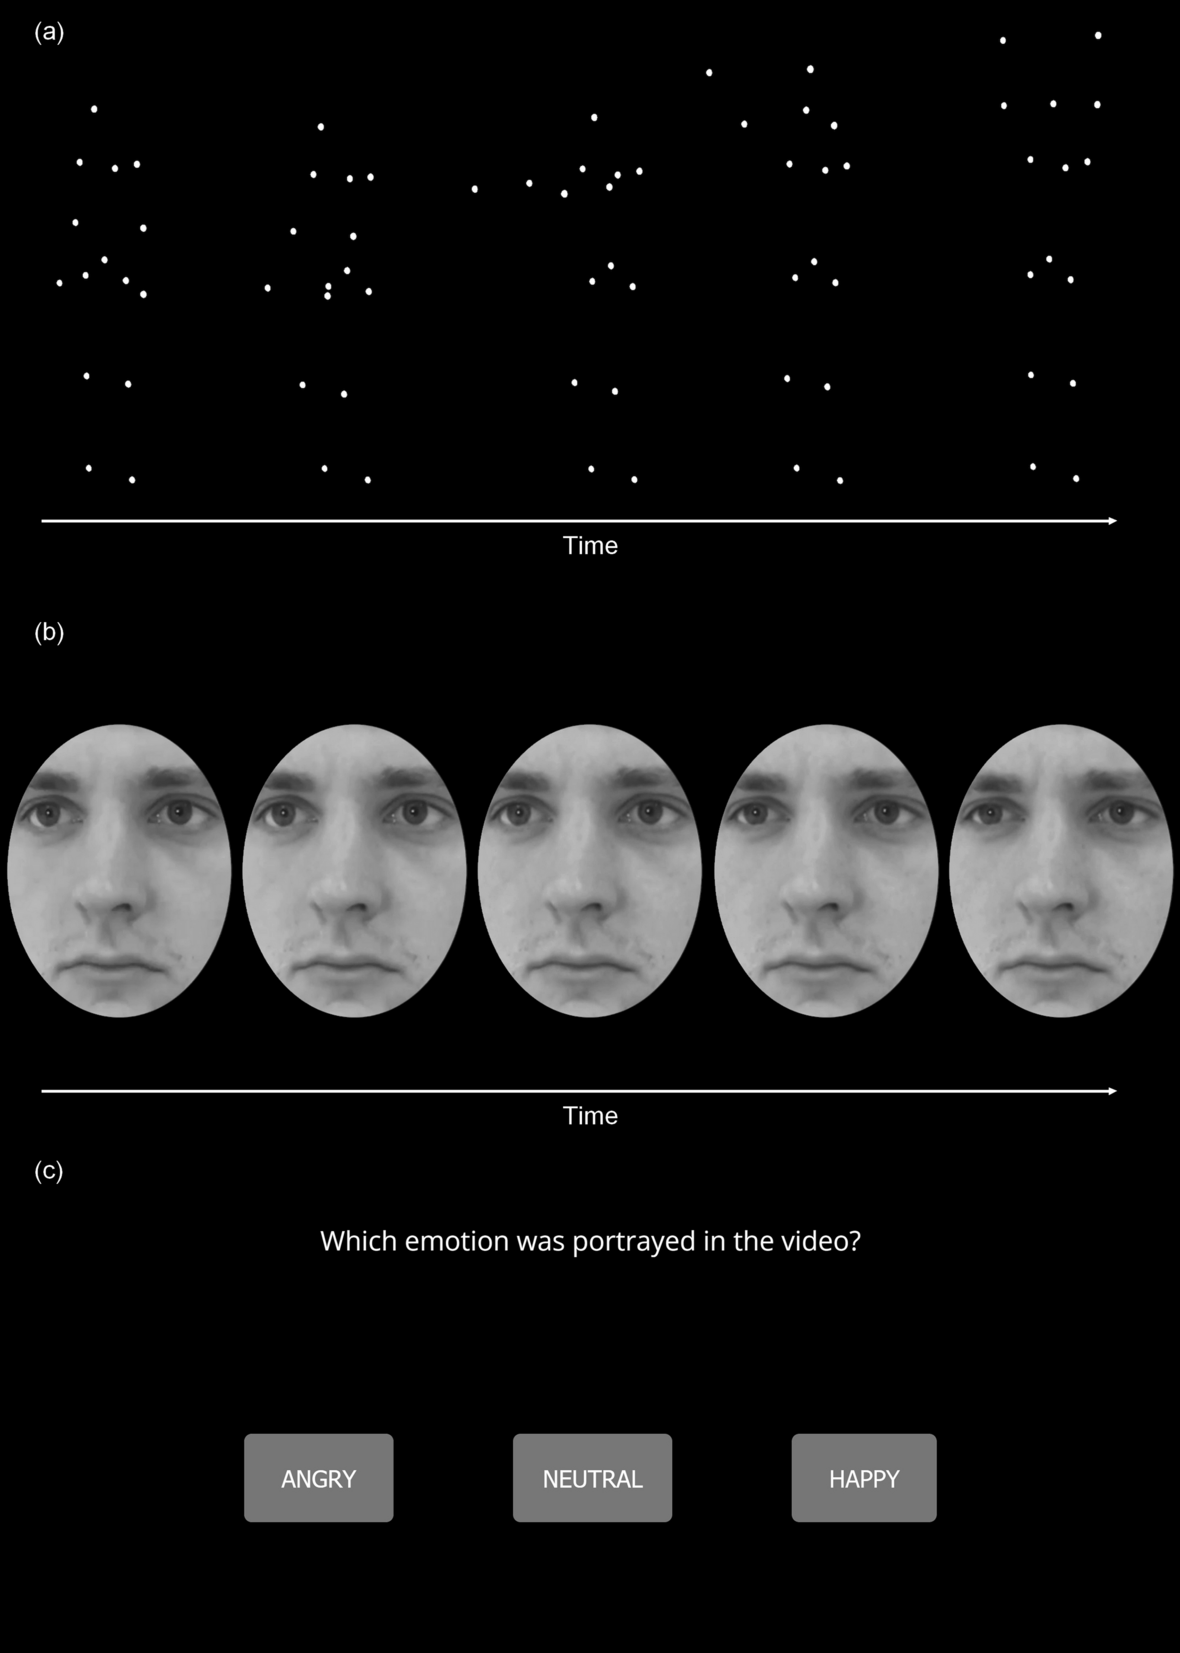 EmBody/EmFace as a new open tool to assess emotion recognition